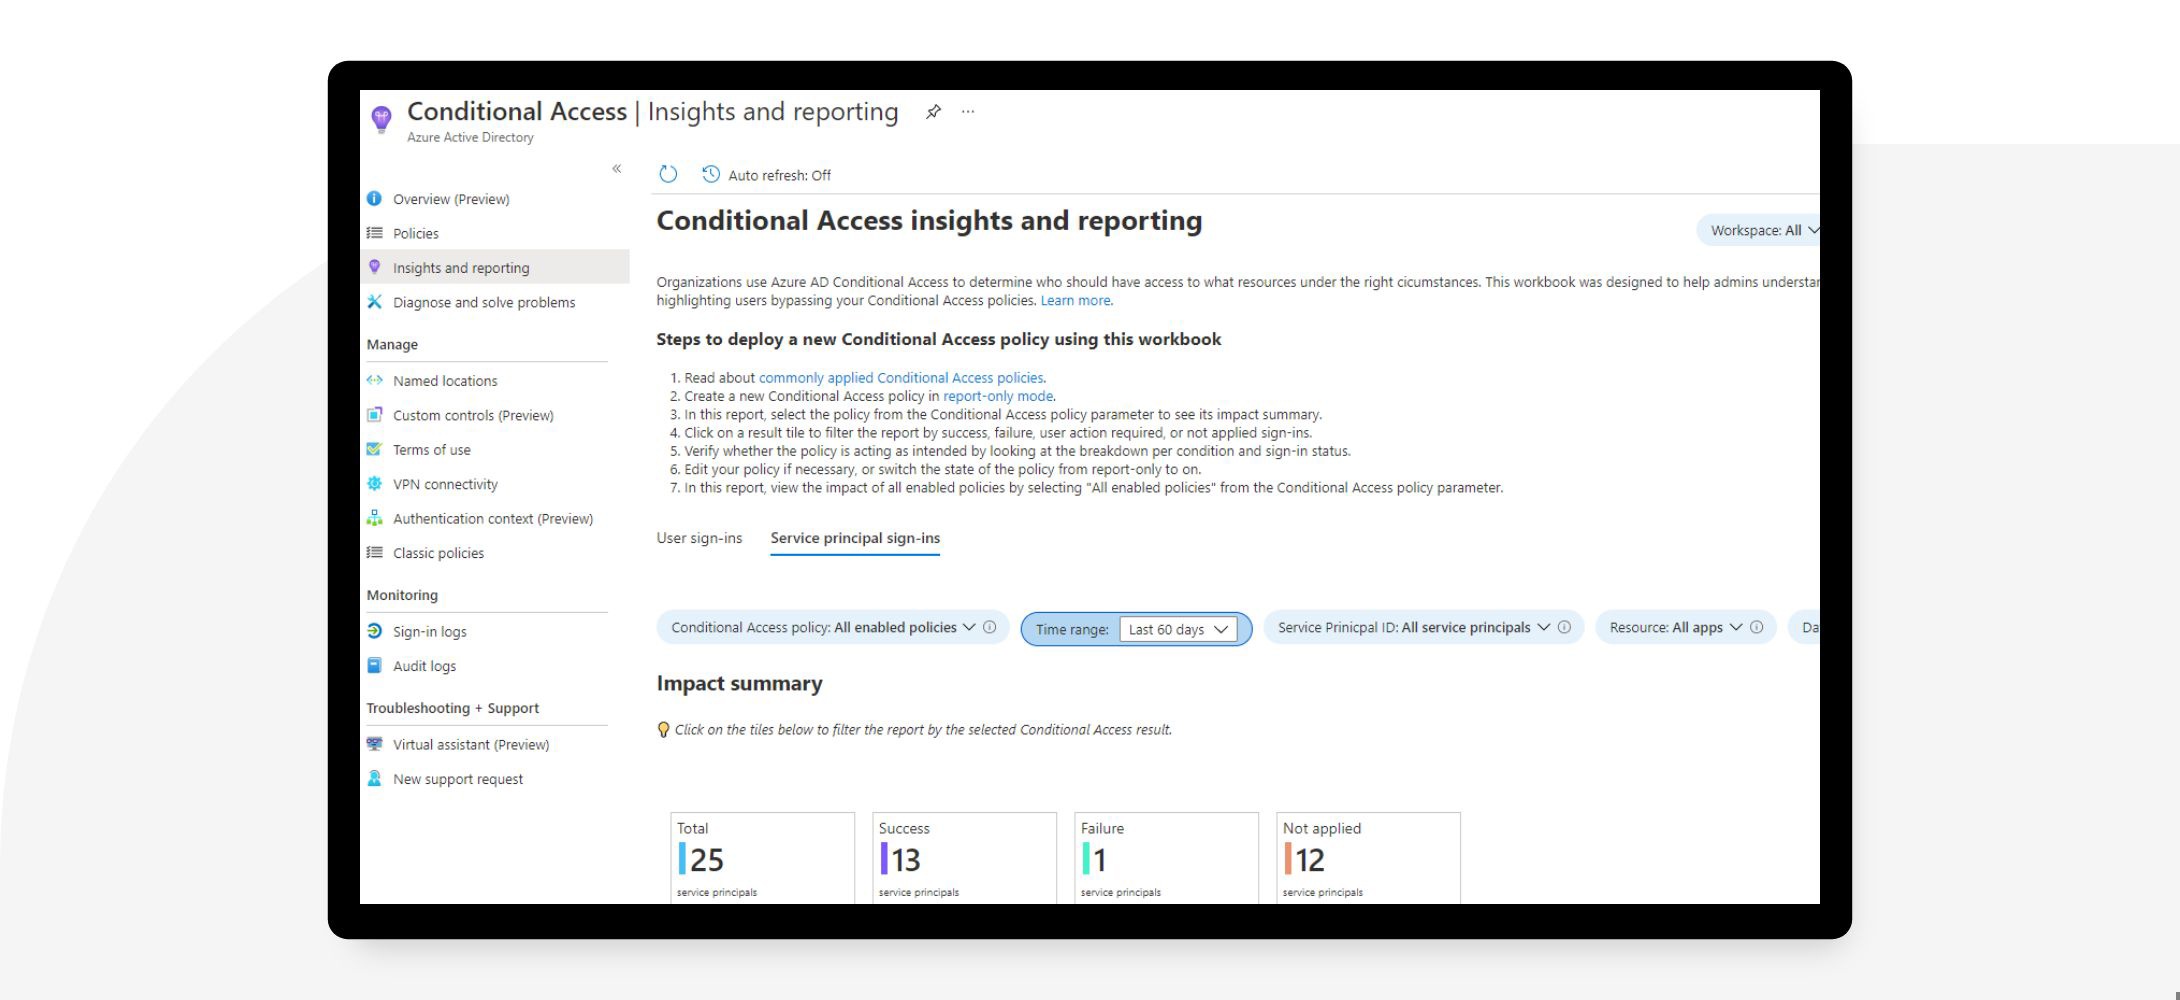 Conditional Access insights and reporting.